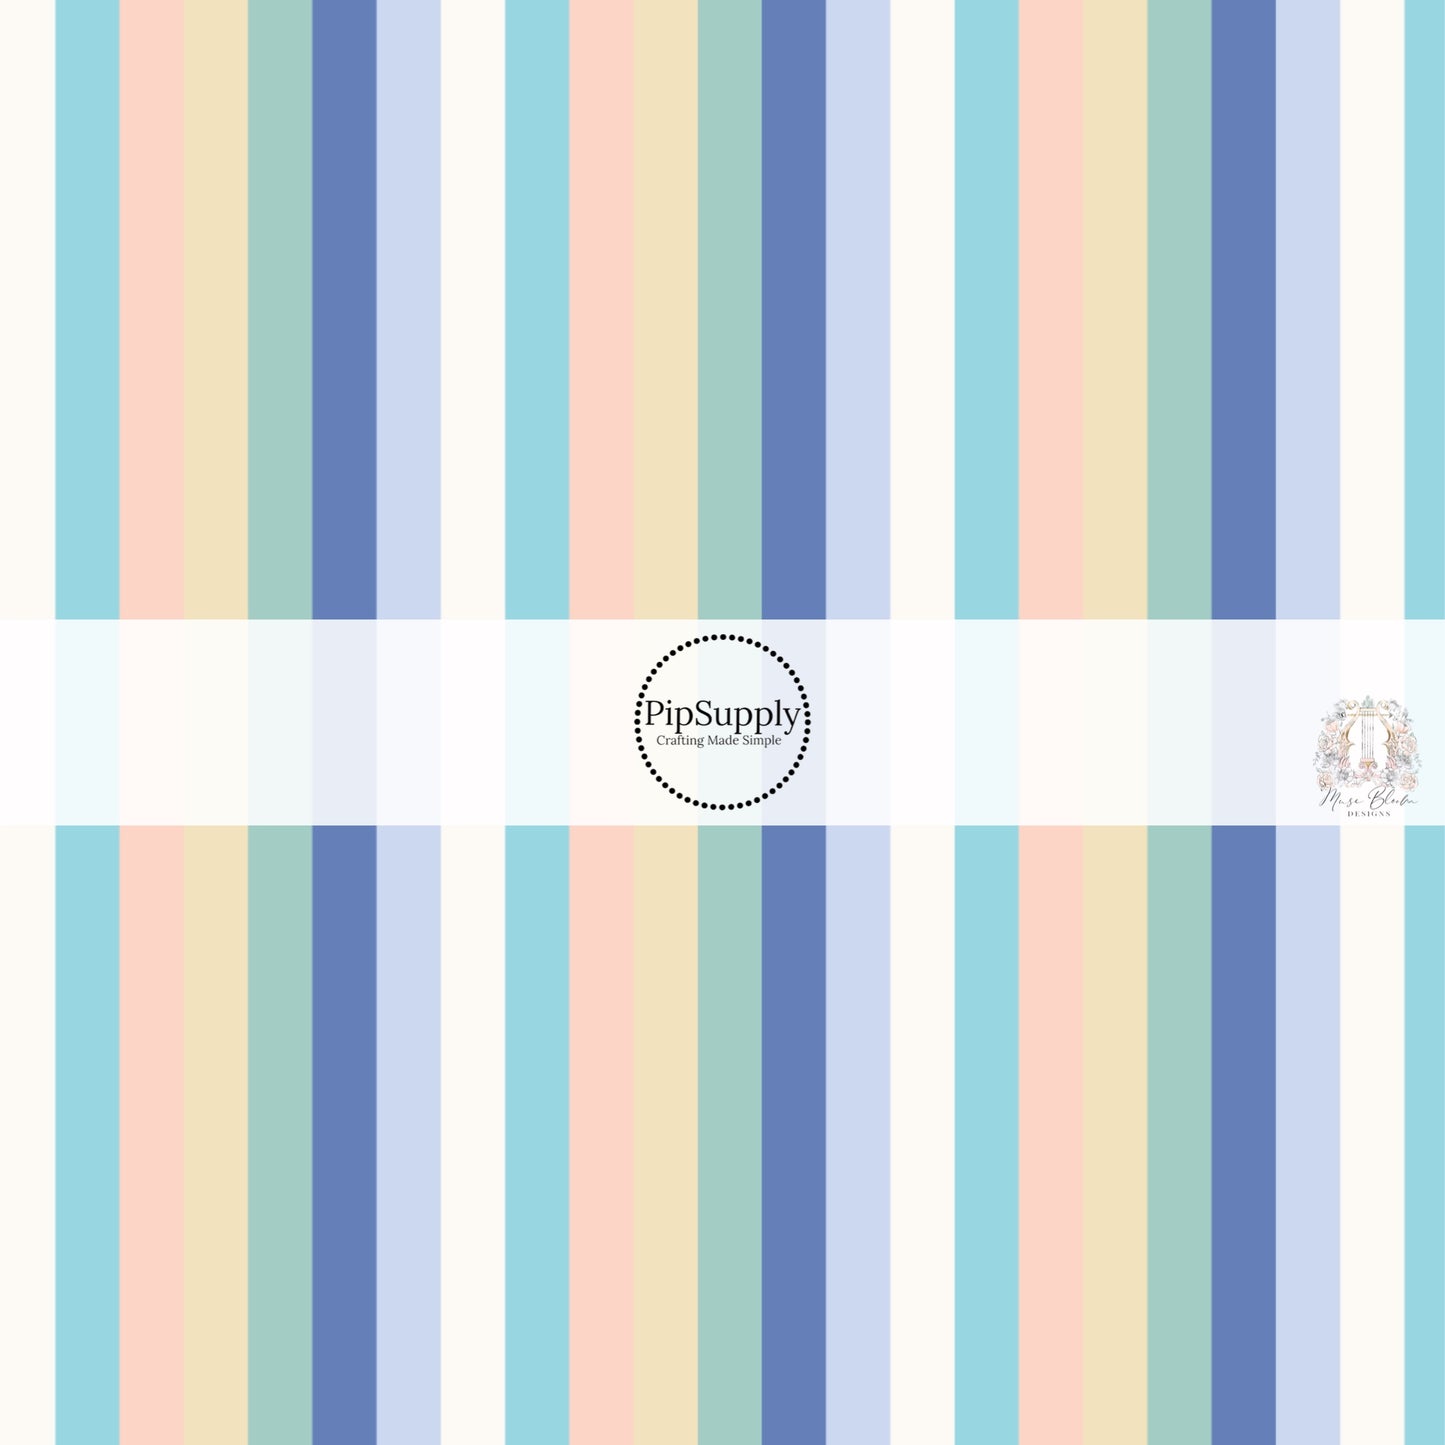 These stripe themed seafoam and periwinkle no sew bow strips can be easily tied and attached to a clip for a finished hair bow. These fun striped themed bow strips features white, tan, teal, aqua, light blue, and periwinkle stripes are great for personal use or to sell.